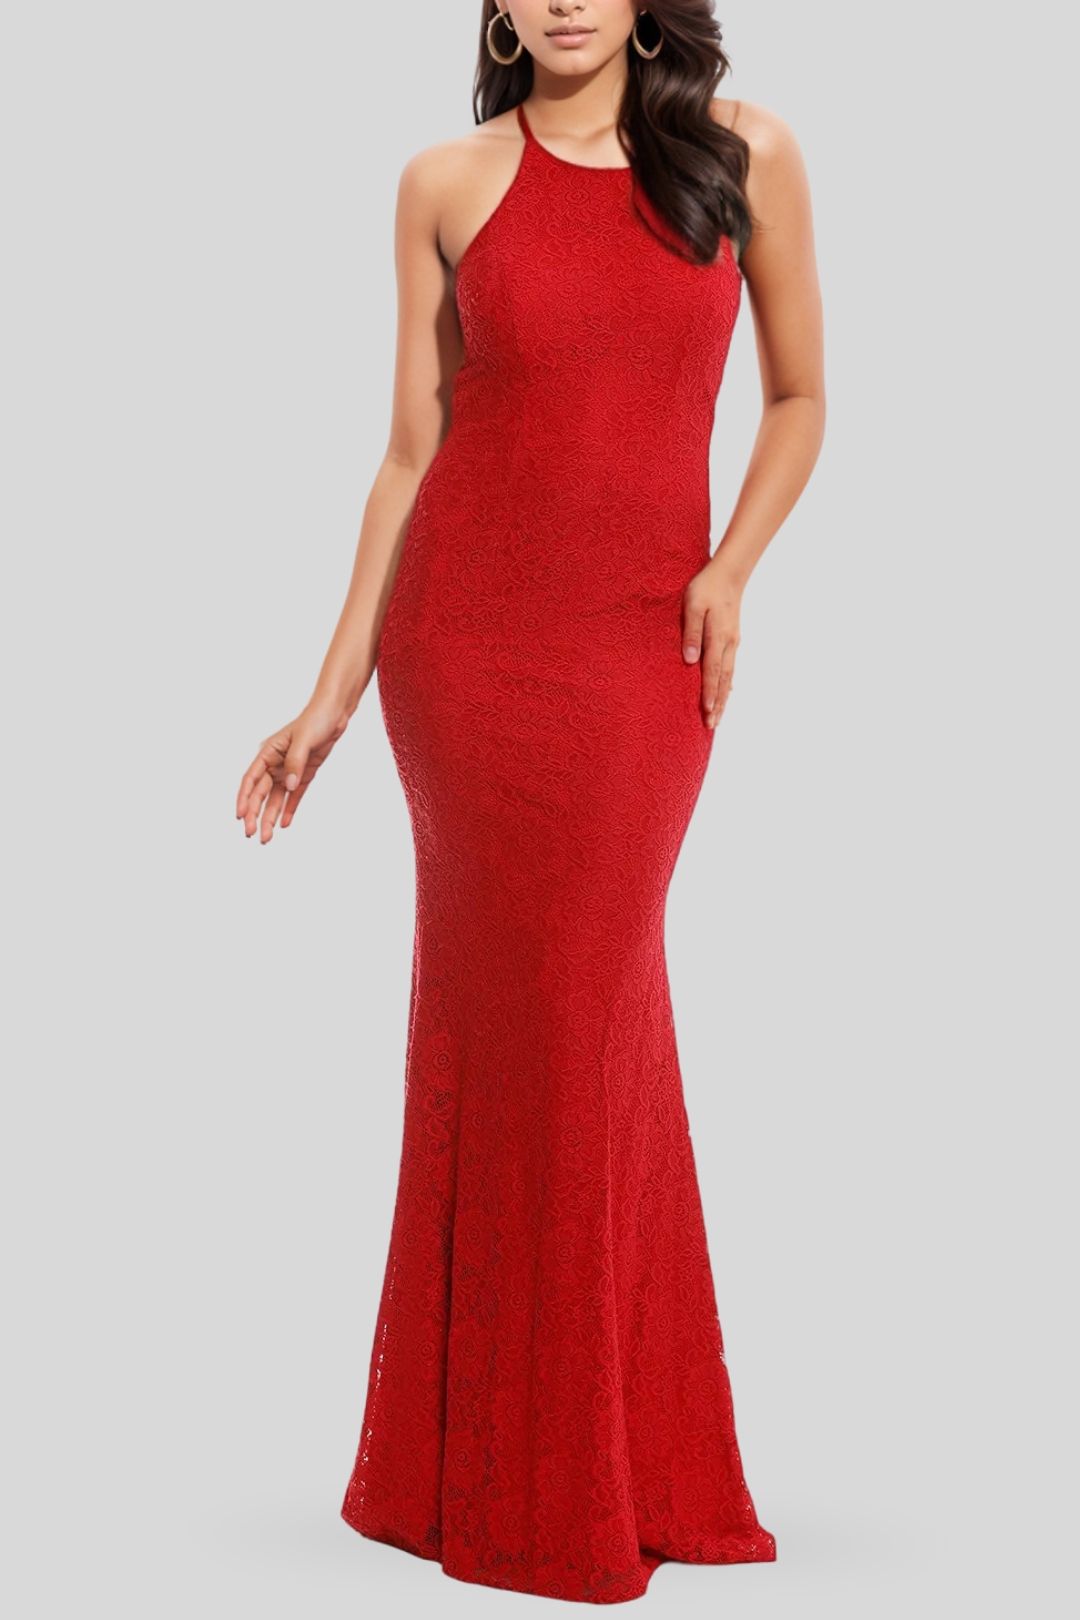 Tania Olsen - Sadie Red Gown - Red - Front